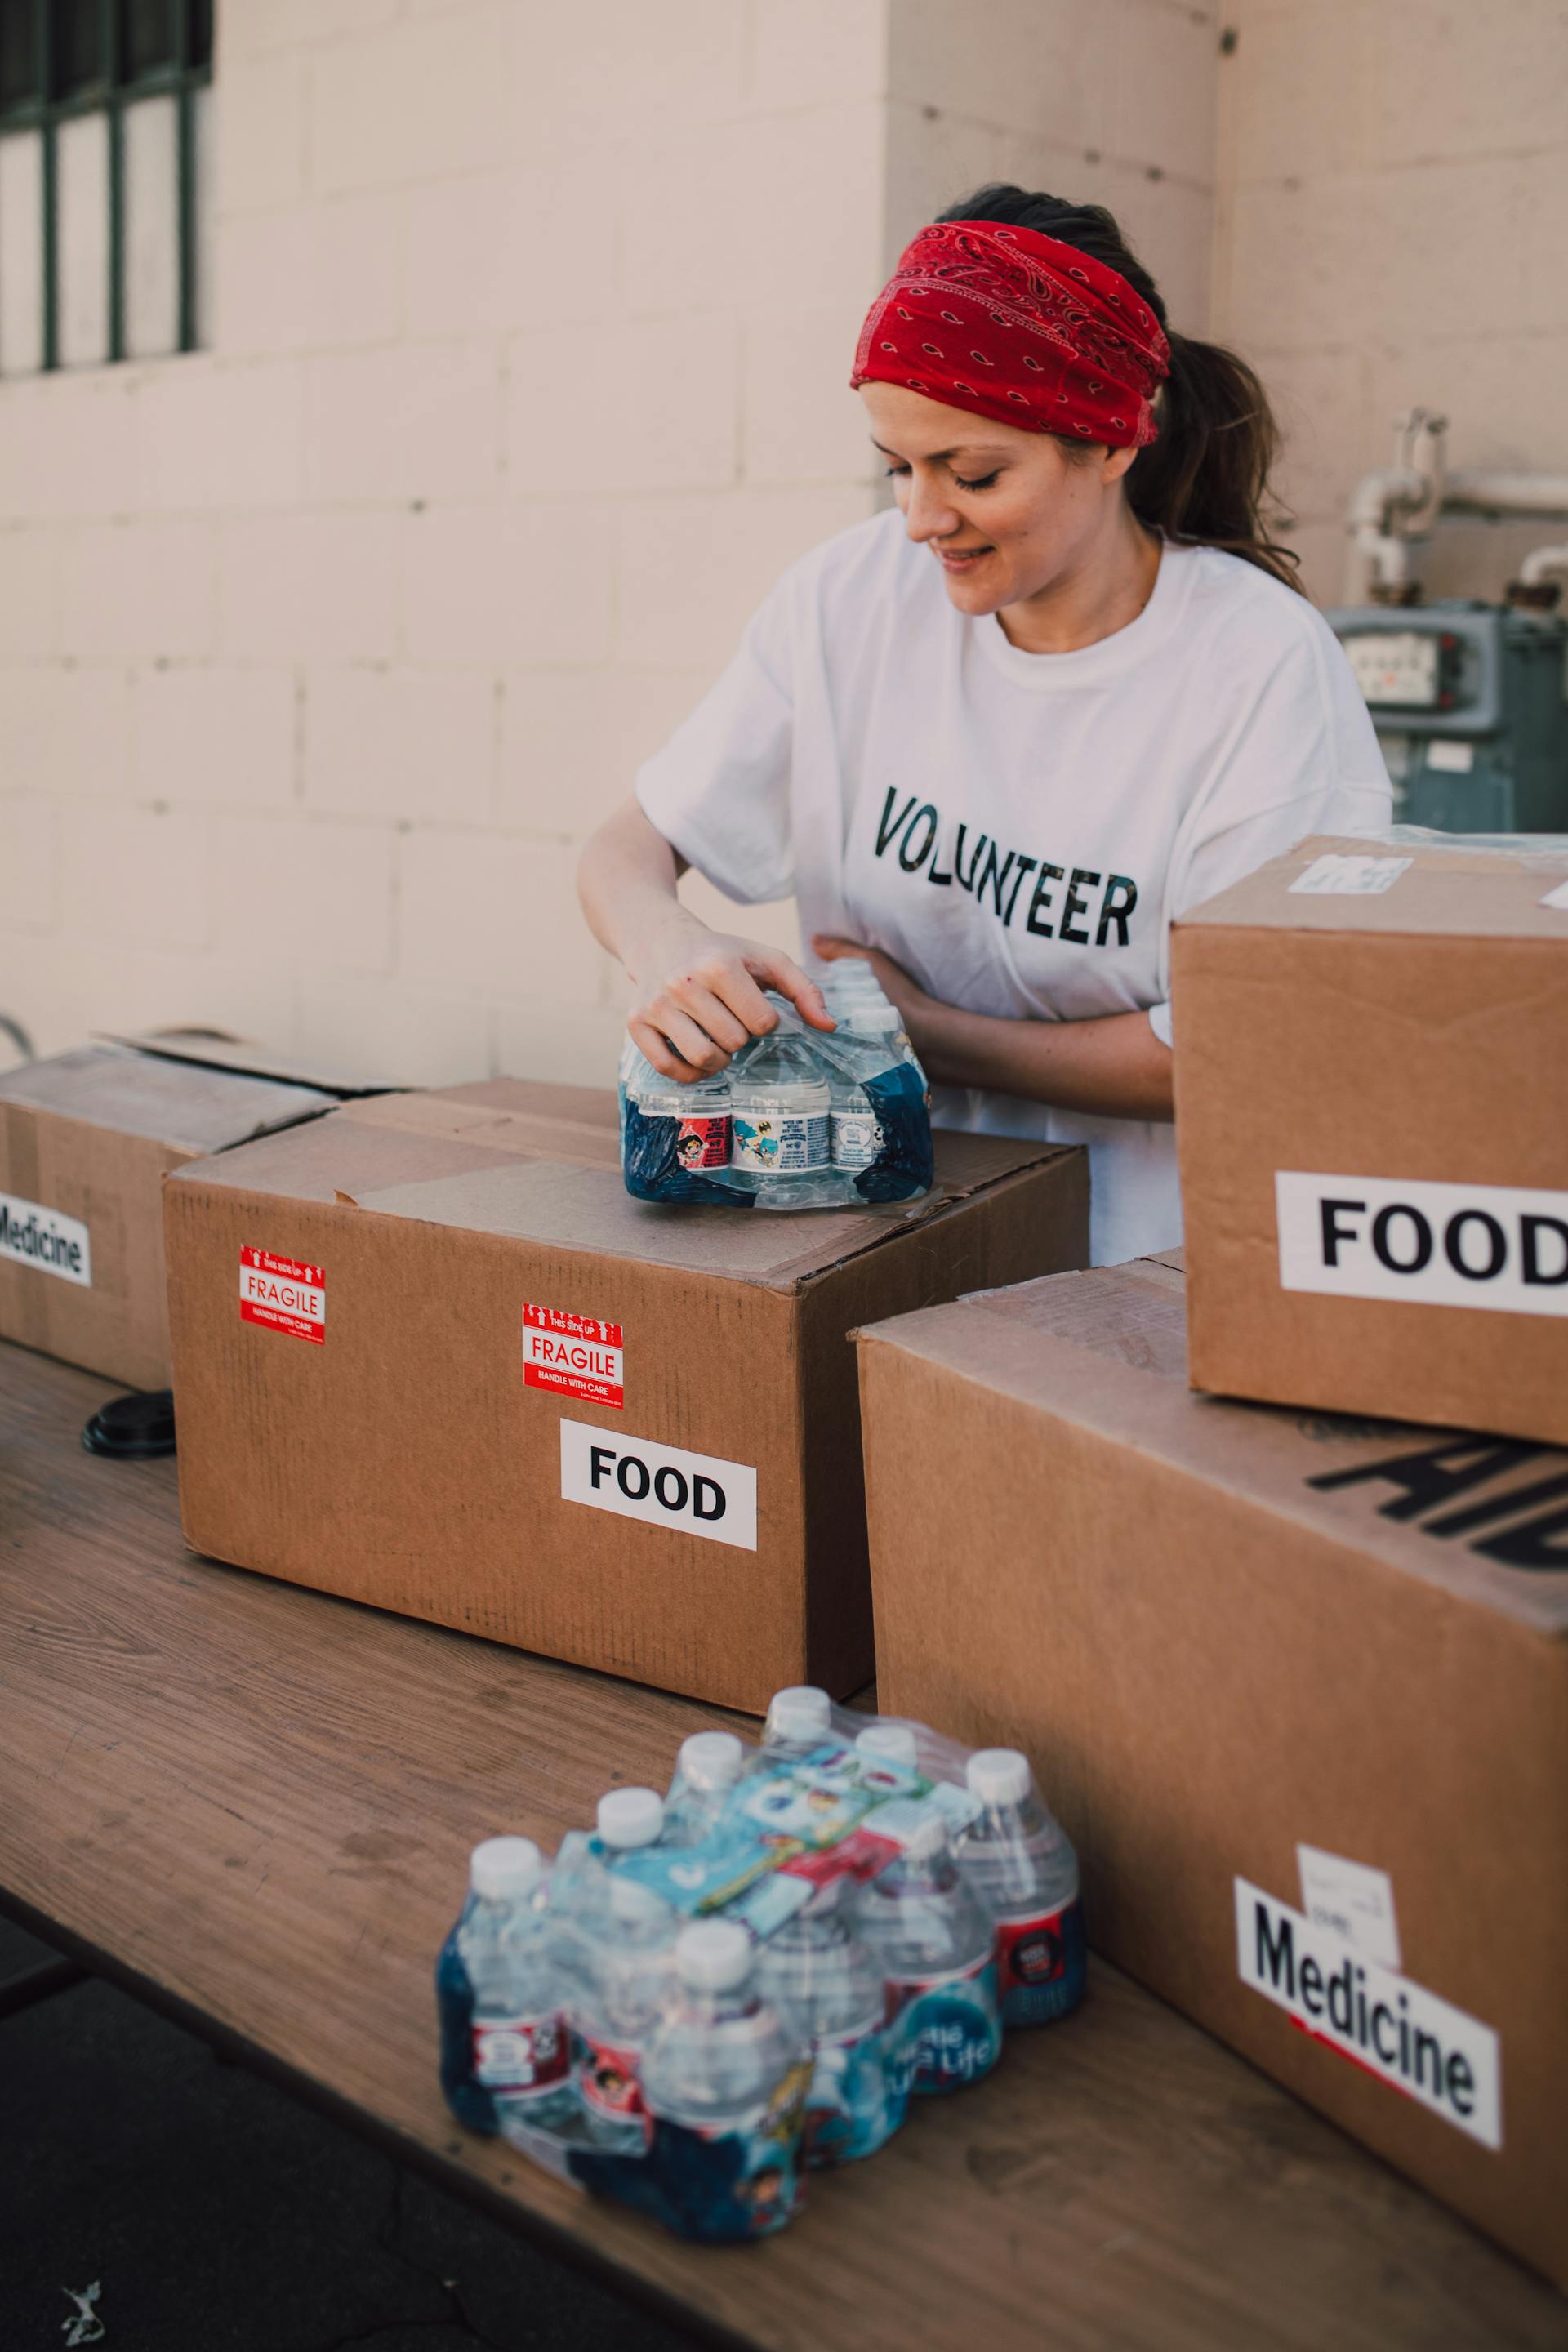 A woman volunteer holding drink bottles on top of a brown box | Source: Pexels 6646